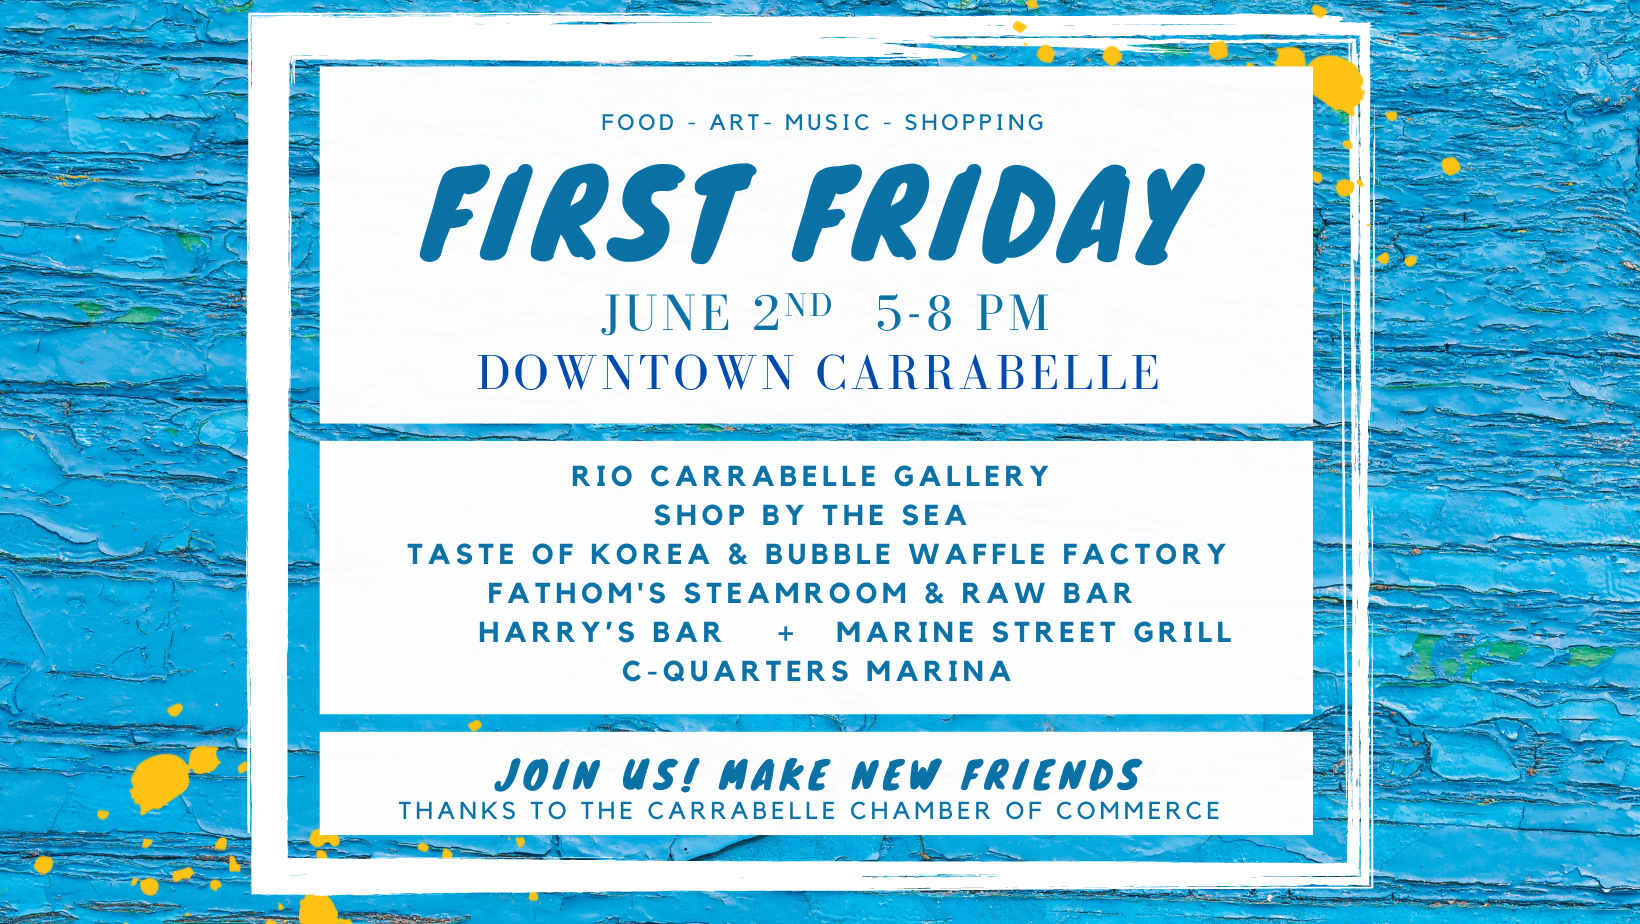 First Friday flyer